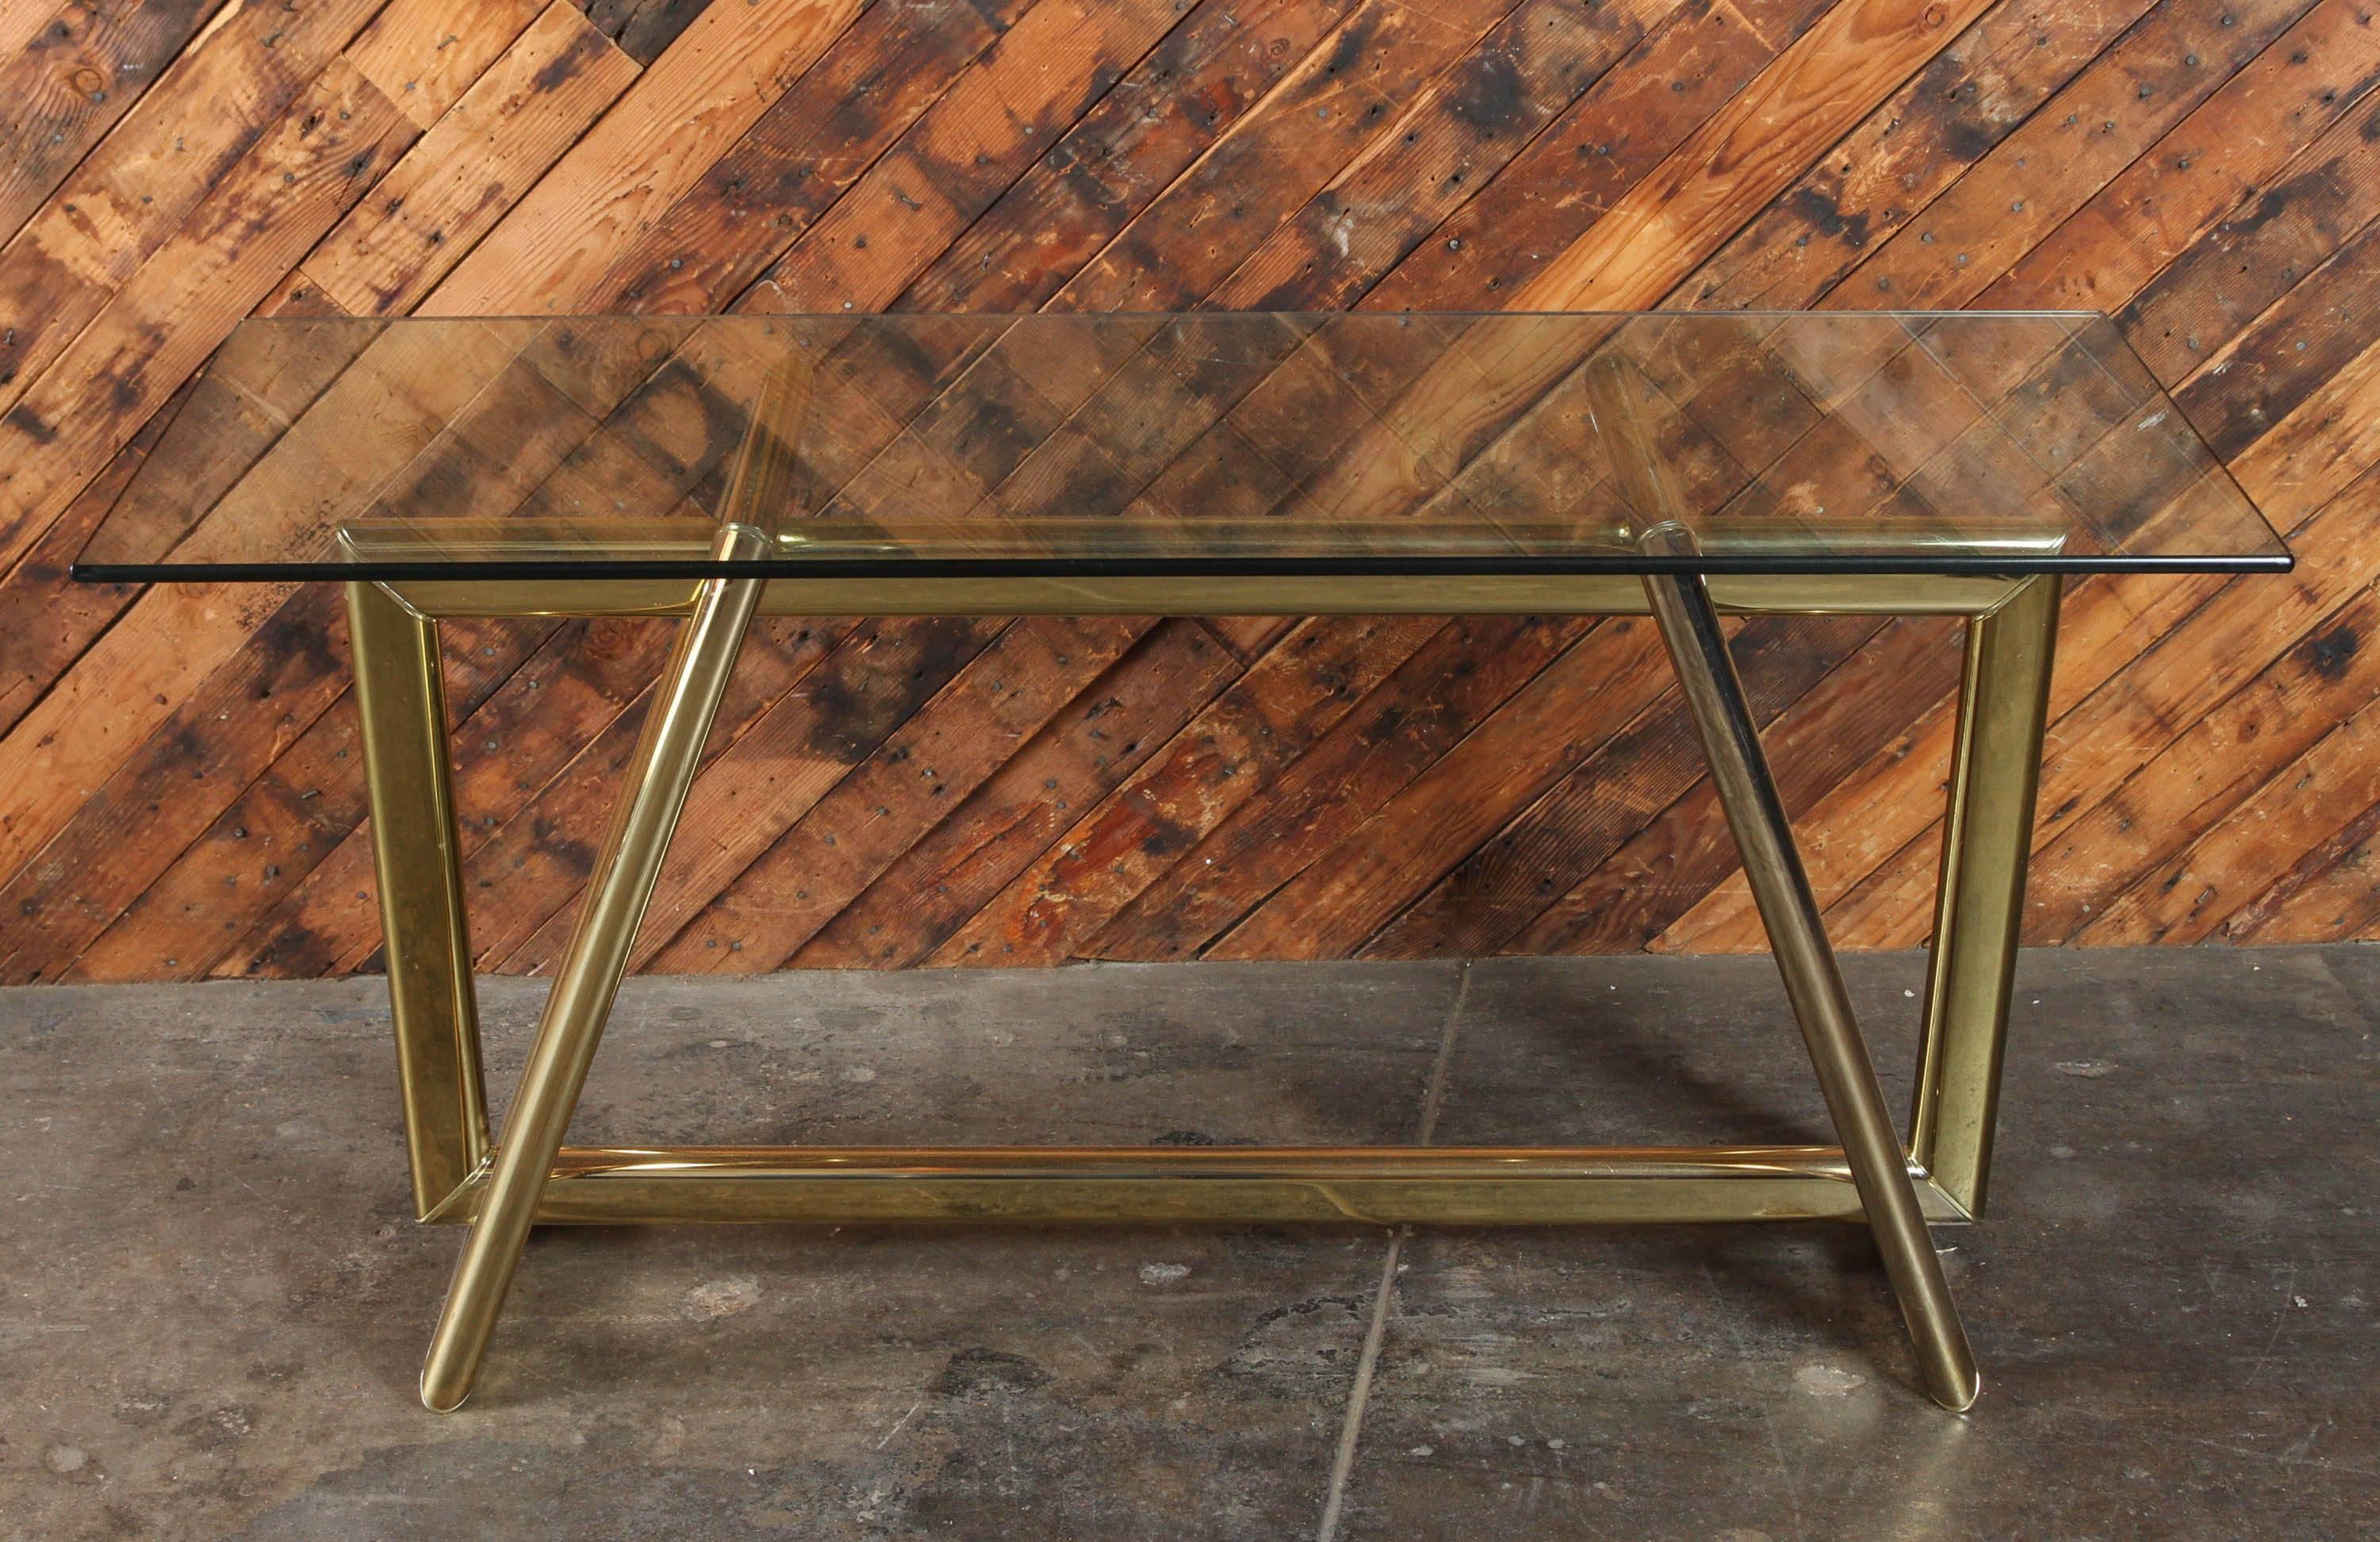 Vintage sculptural brass base thick glass console table

thick beveled glass, beautiful sculptural brass base, in good condition except for one small spot has faded as shown and some scratches, could use re platting 

Measures: Length 54, height